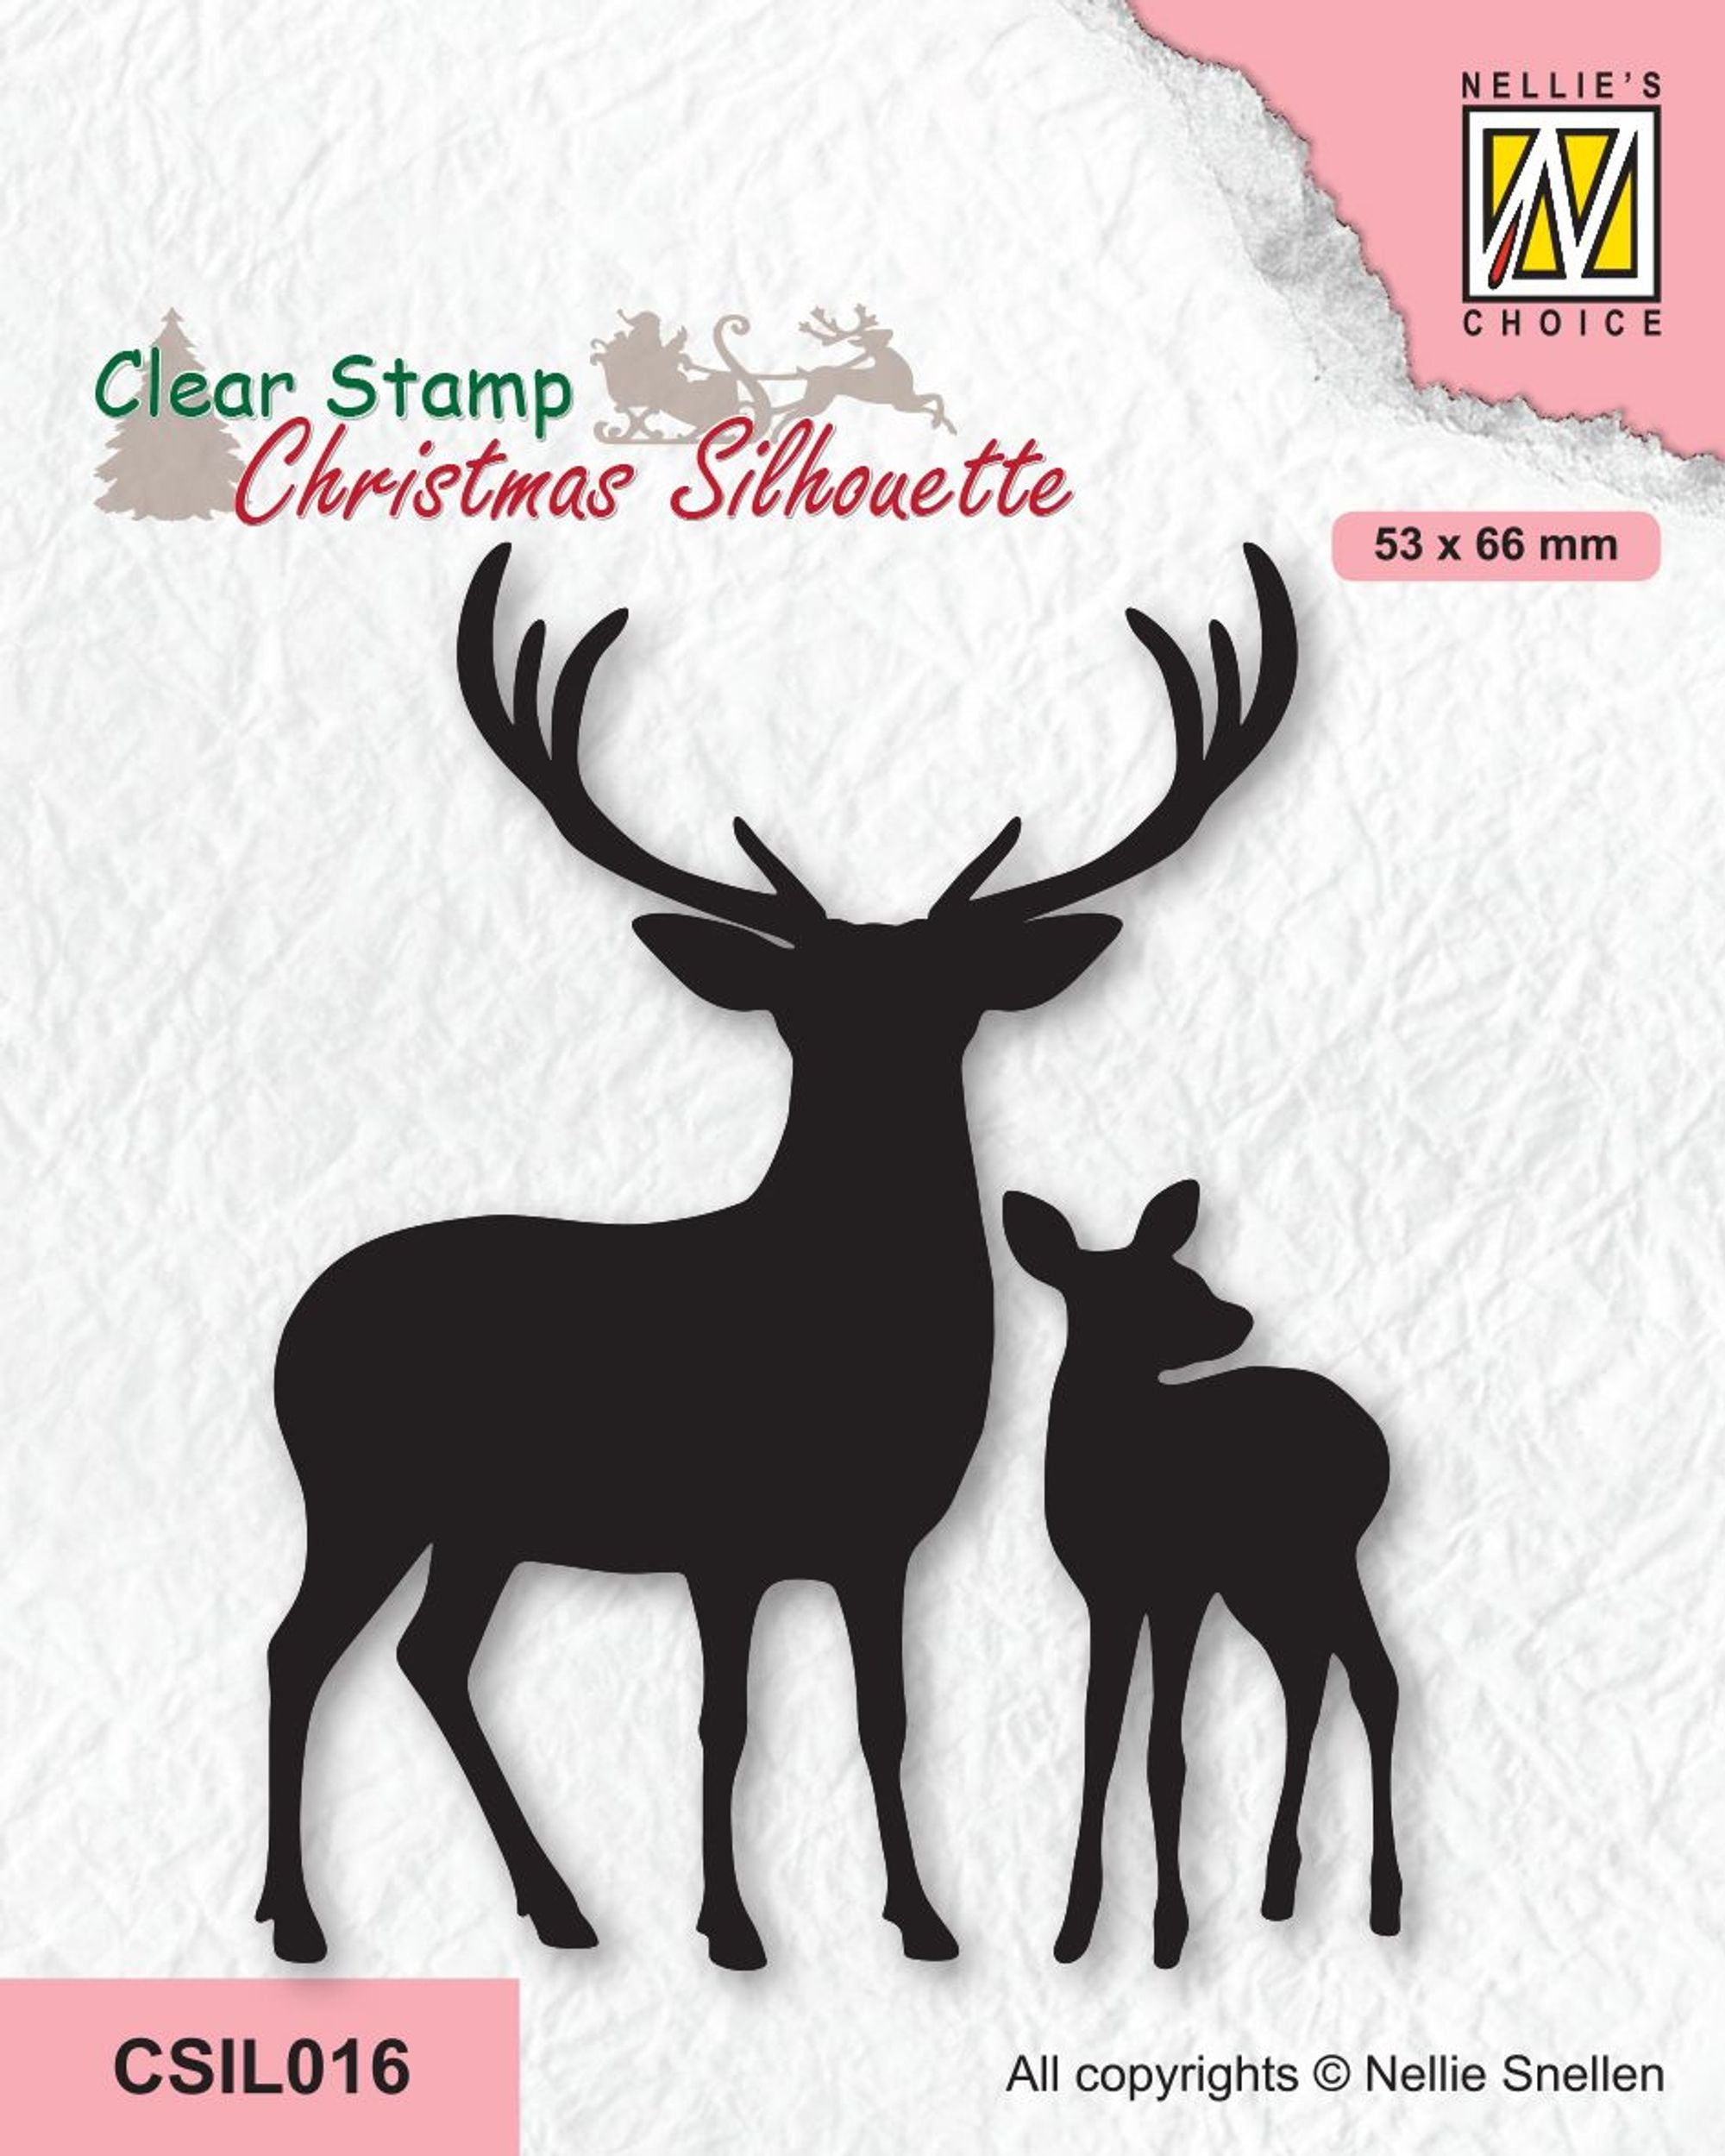 Nellie's Choice Clear Stamp Christmas Silhouette - Deer With Young